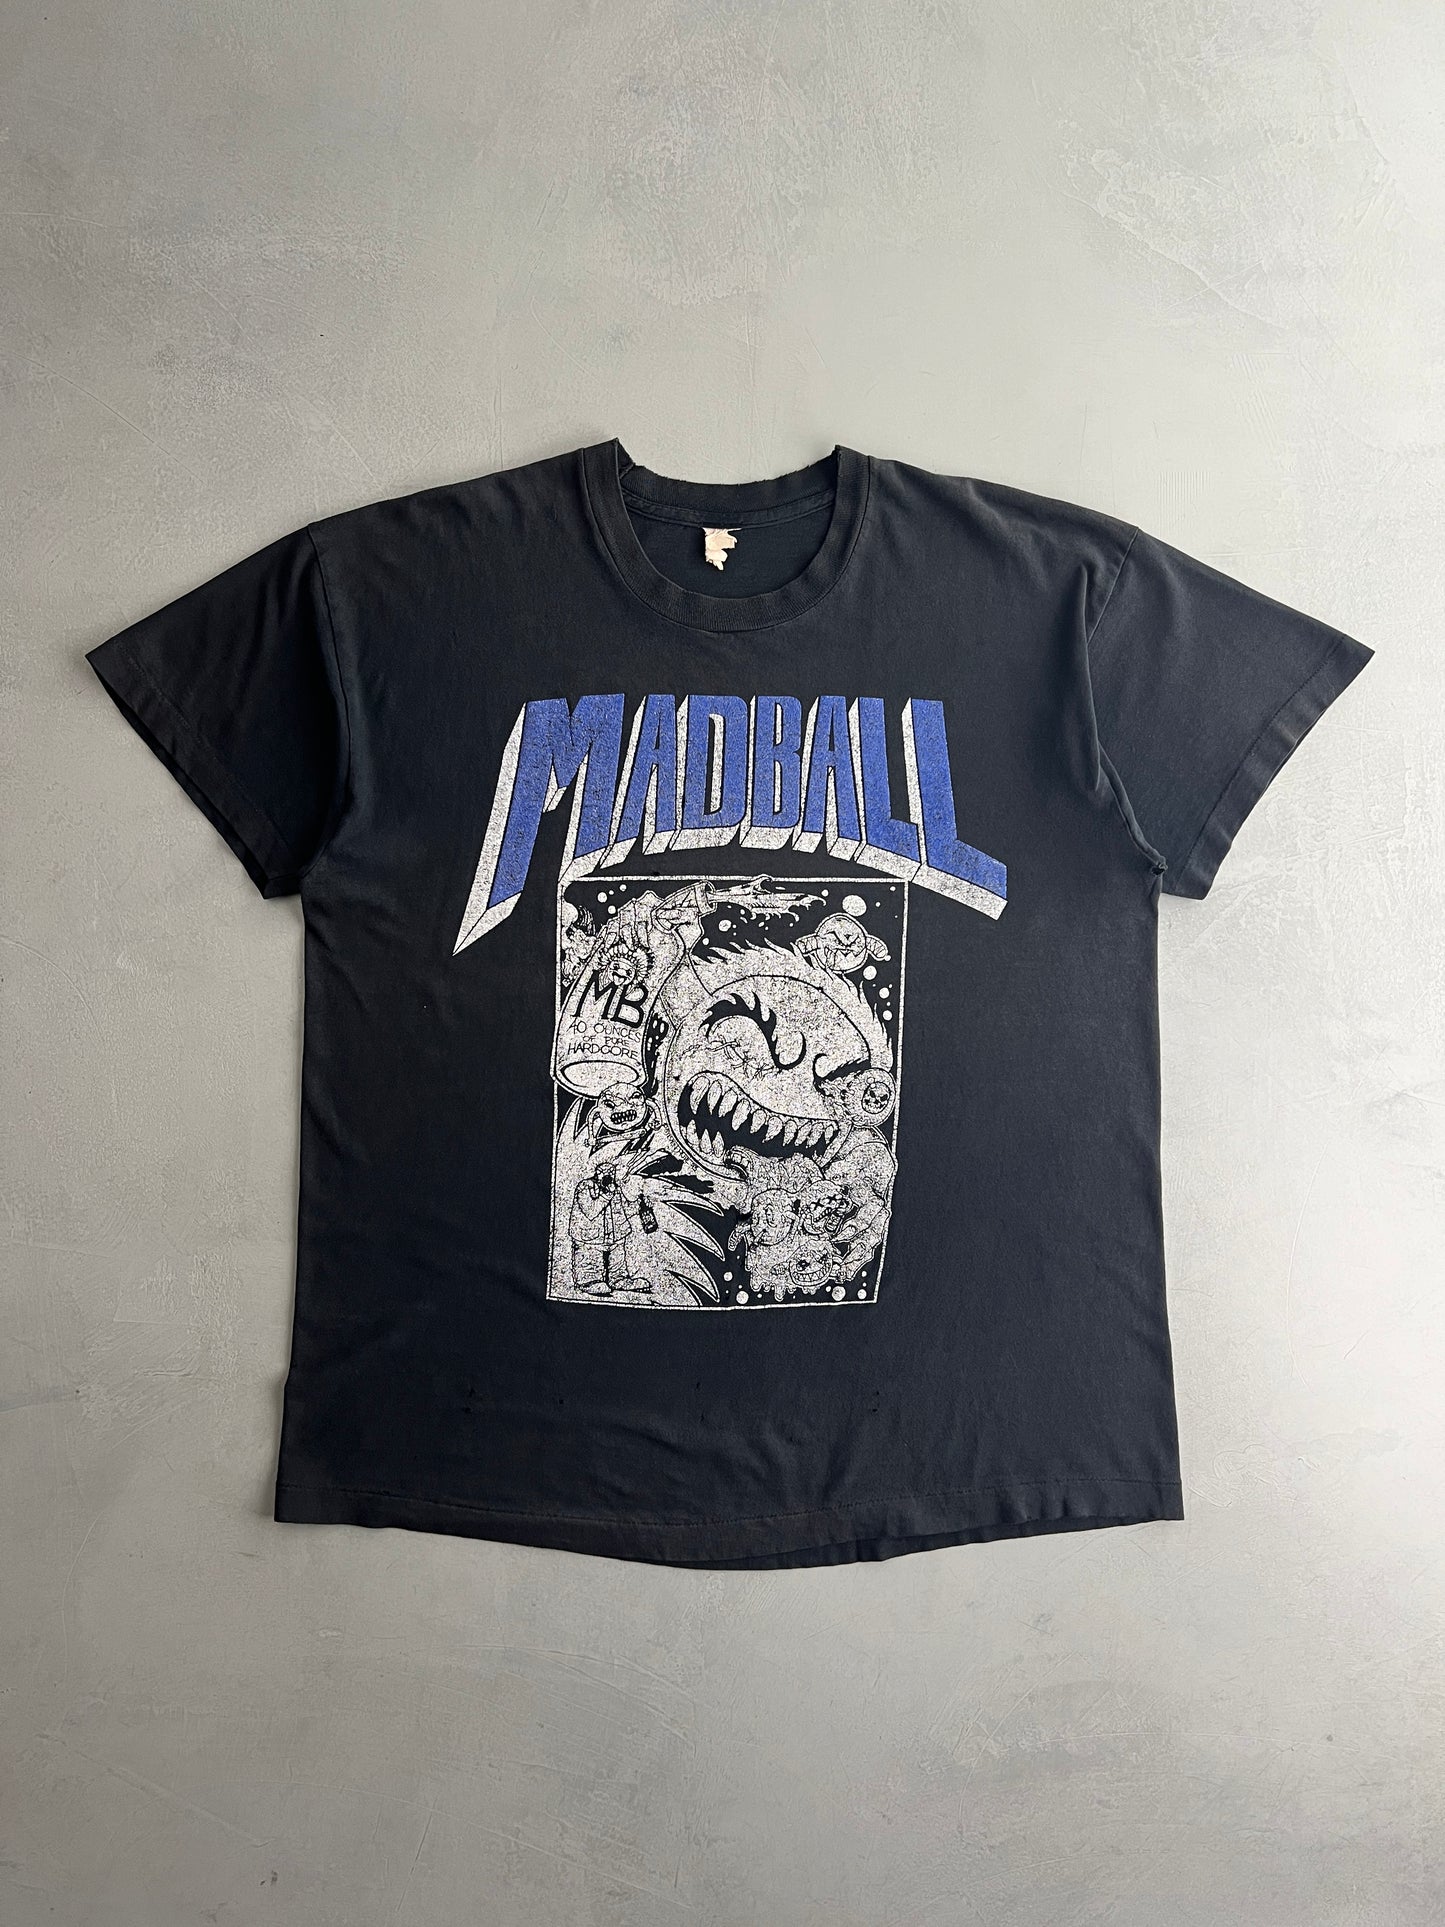 '95 Madball 'Streets of Hate' Tour Tee [XL]